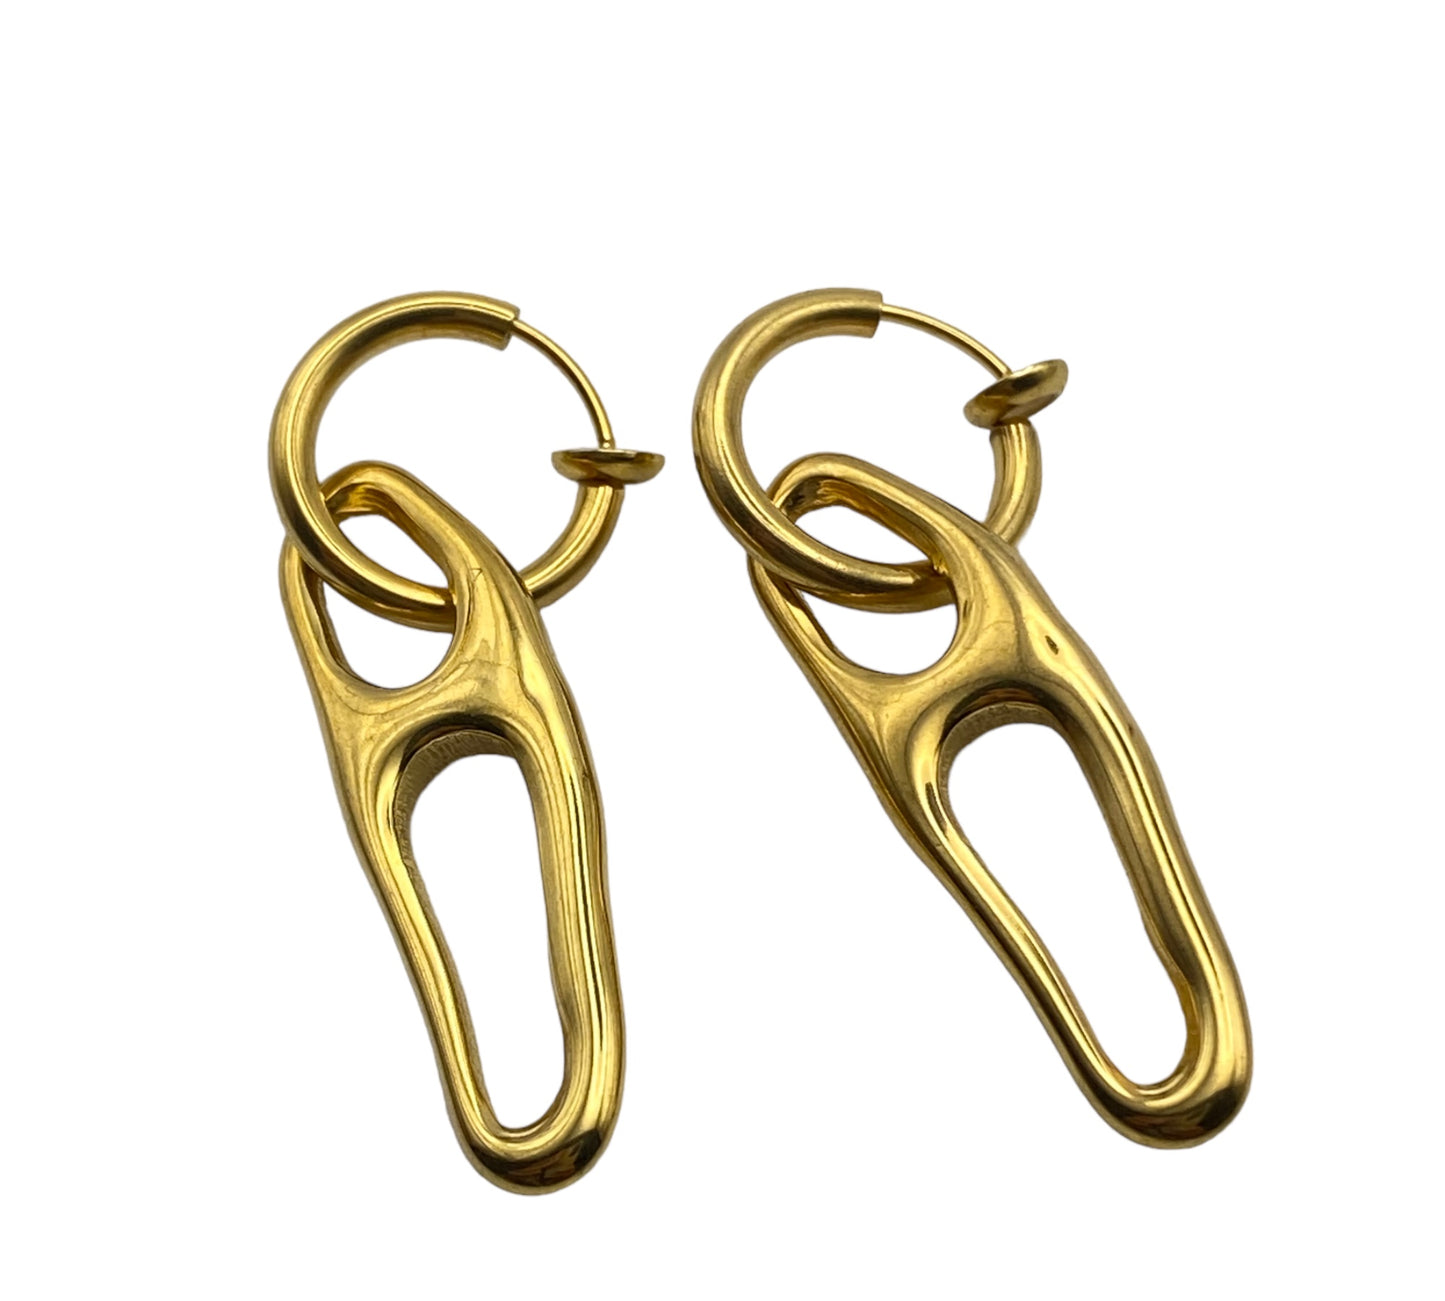 "BOHO" gold plated hoop earrings with dangling contemporary charm